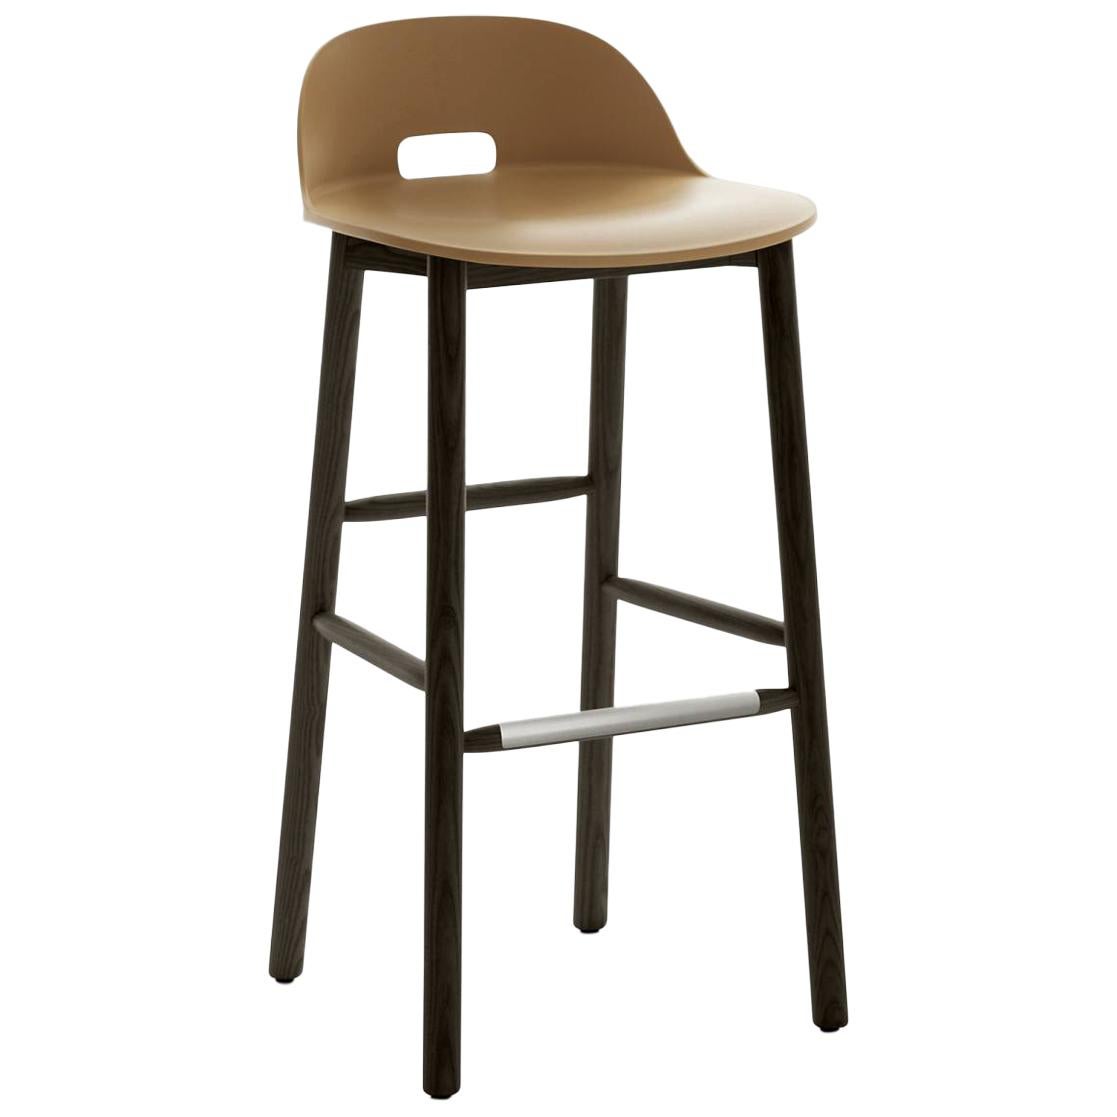 Emeco Alfi Barstool in Sand and Dark Ash with Low Back by Jasper Morrison